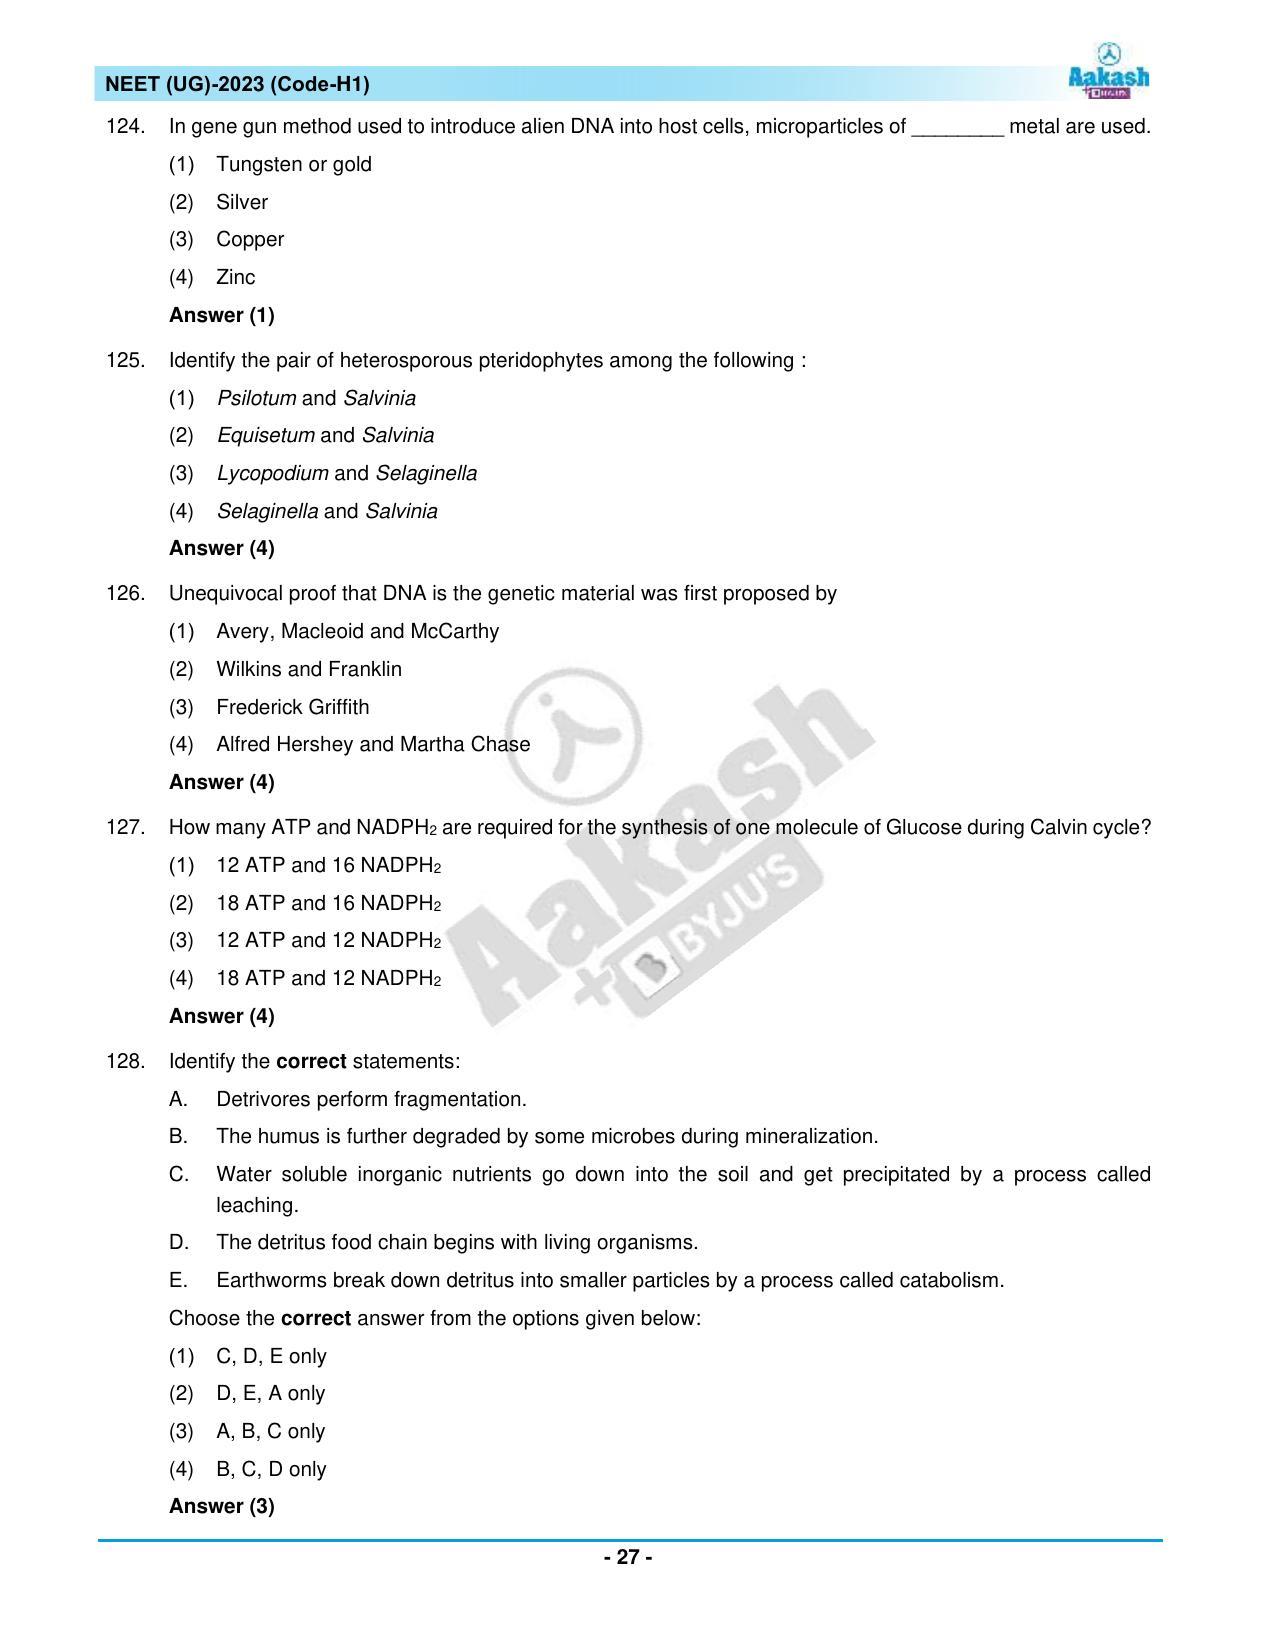 NEET 2023 Question Paper H1 - Page 27